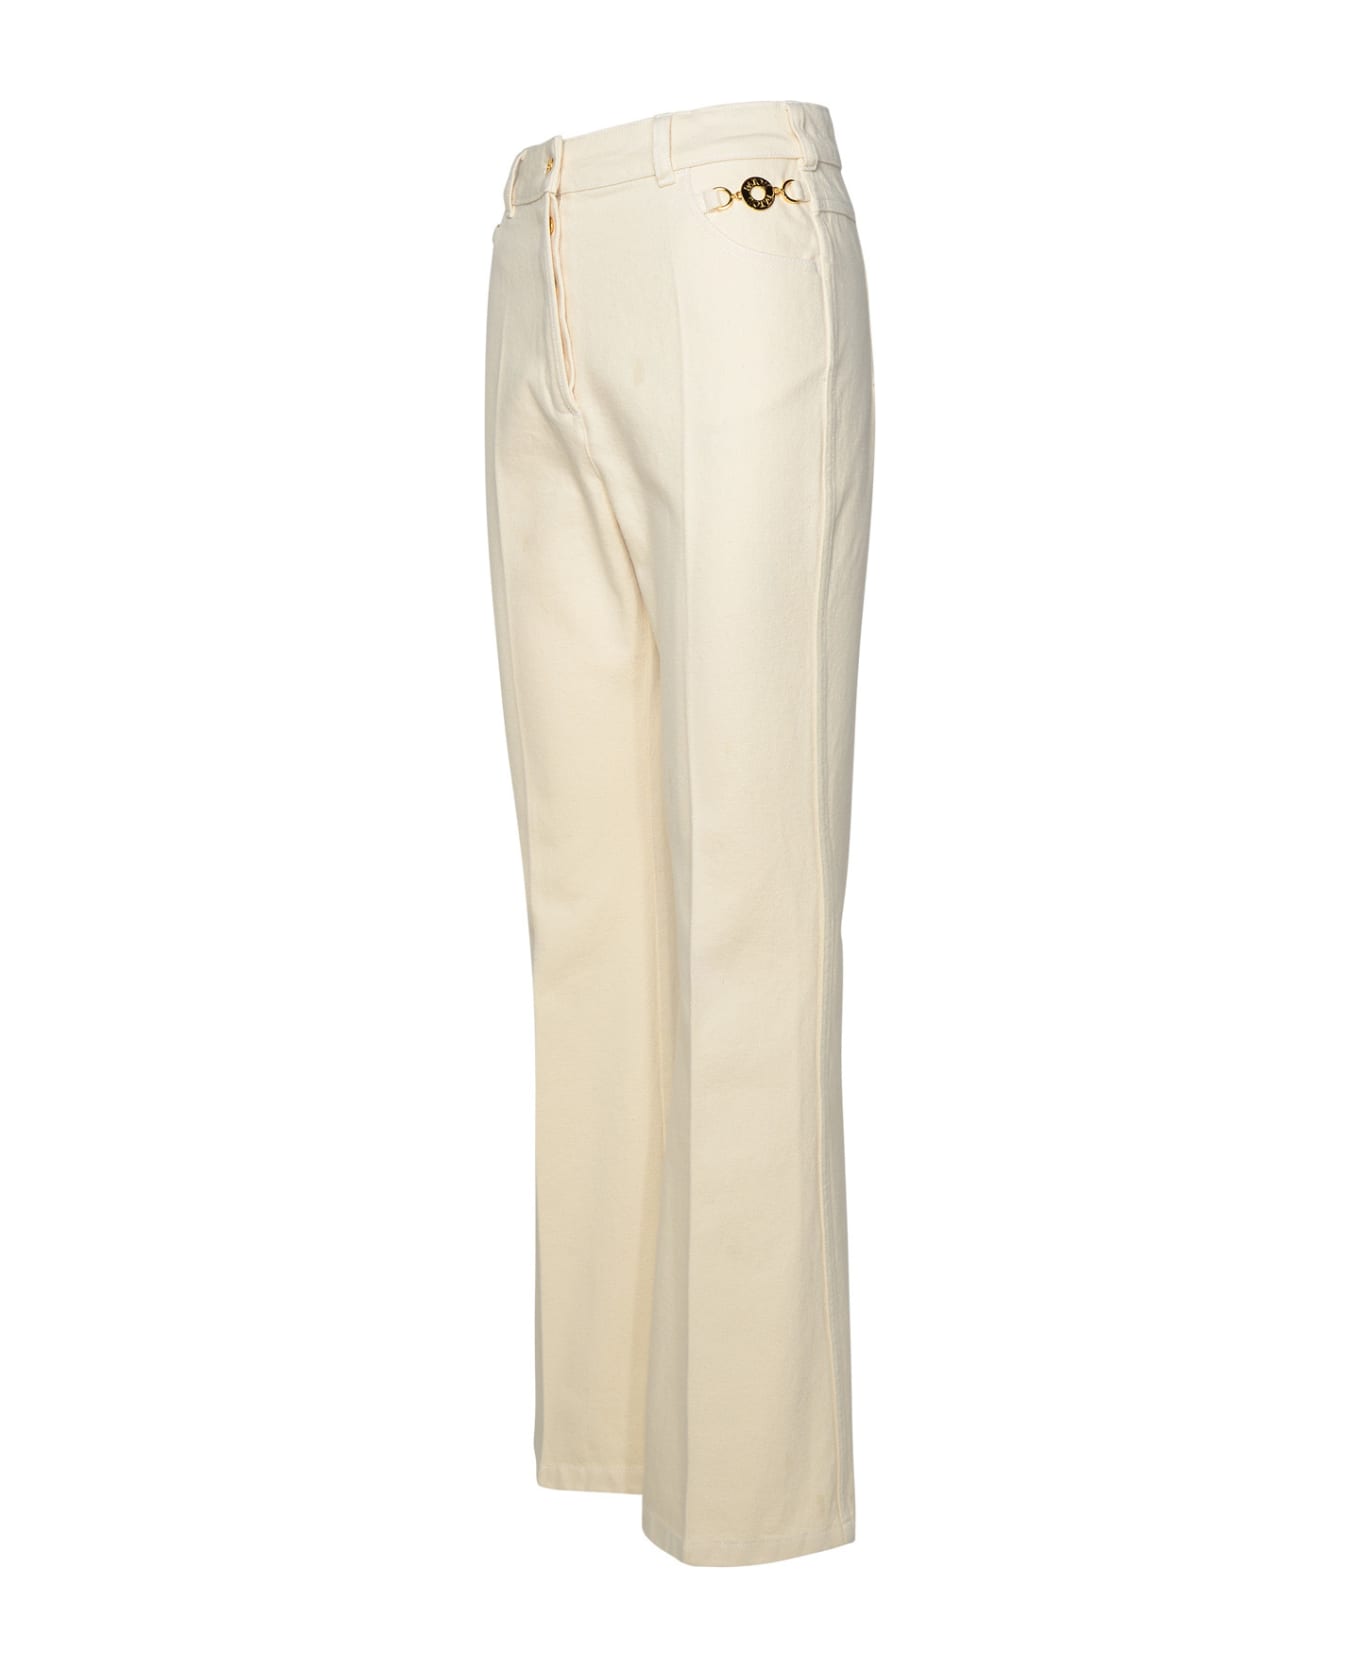 Patou Ivory Cotton Flare Jeans - Ivory ボトムス